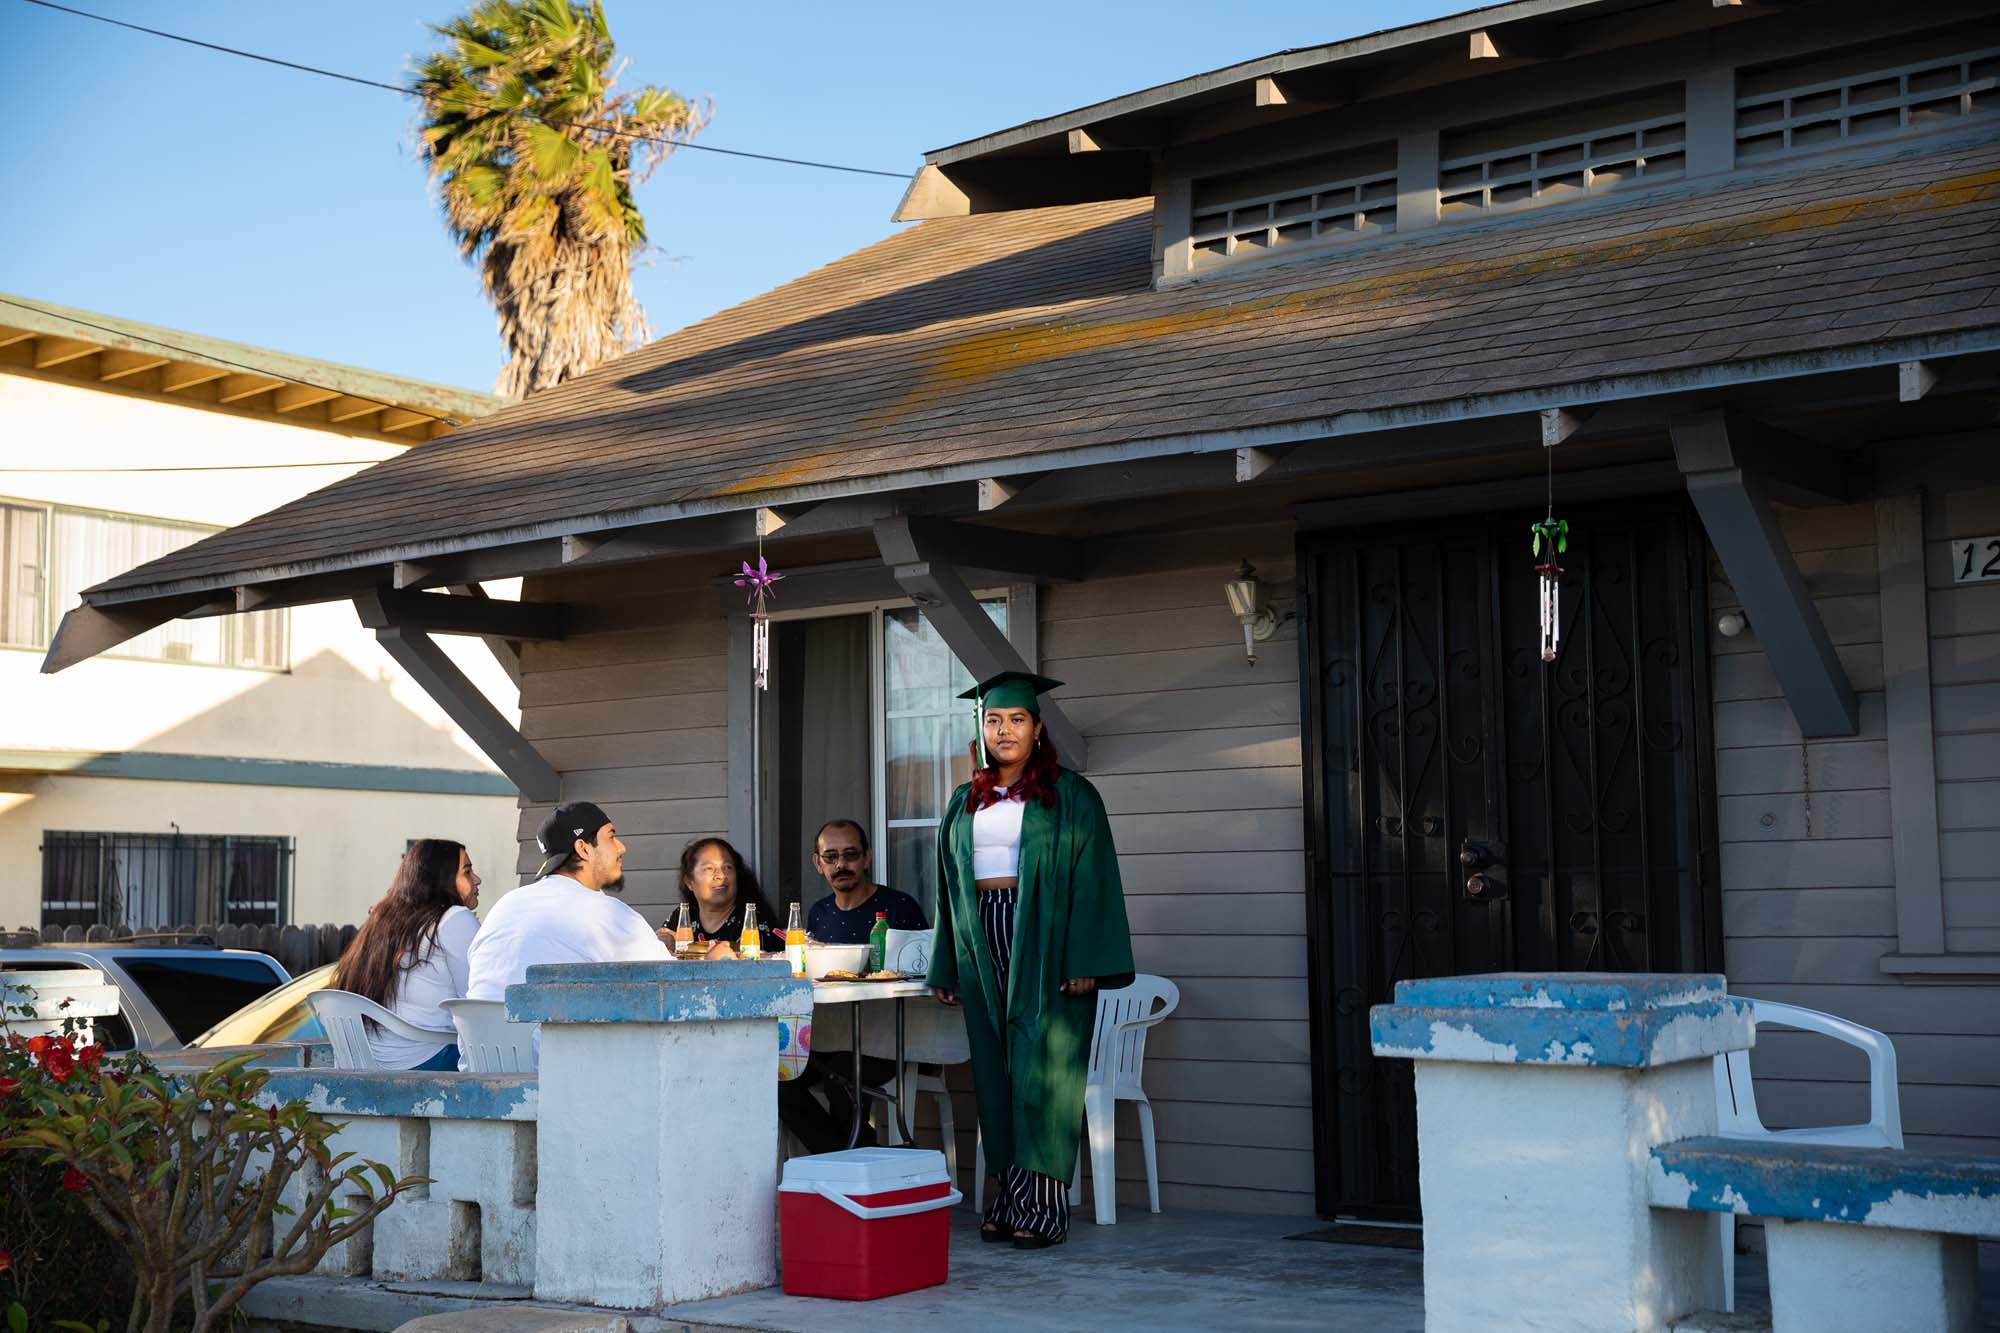 Leslie Ramirez and her family celebrate her graduation from Hamilton High School's Humanities Magnet at their home in South L.A. She said, 'I'm first-generation. My parents come from Guatemala, my grandparents as well. They came here for us to have a better future. Graduating high school is a big milestone.'